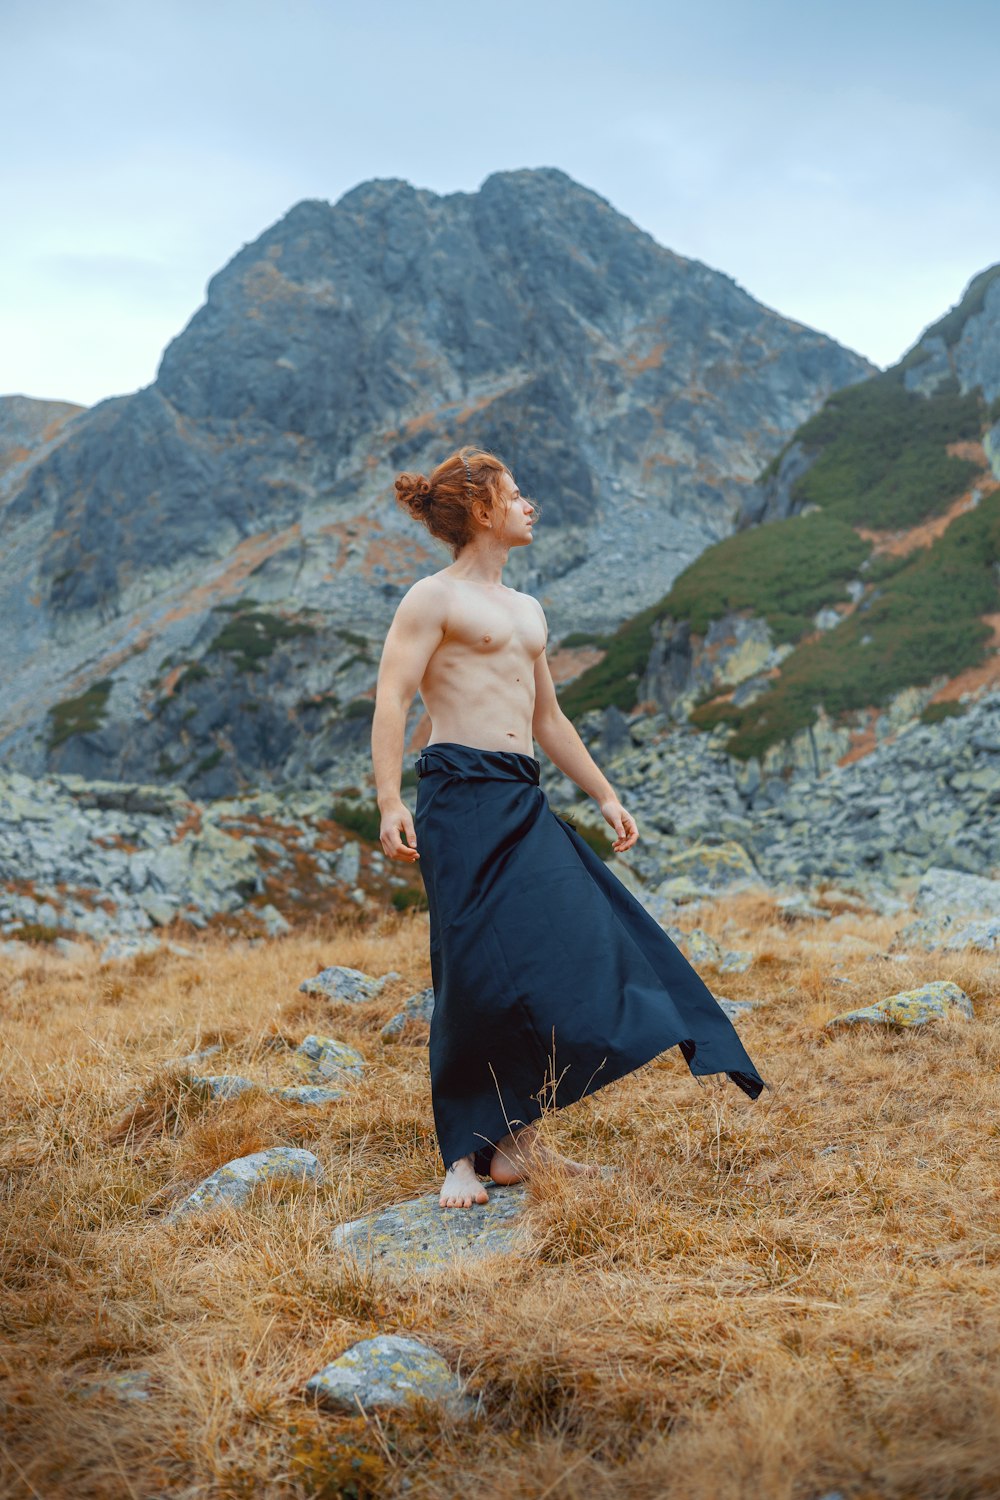 a shirtless man in a long skirt standing in a field